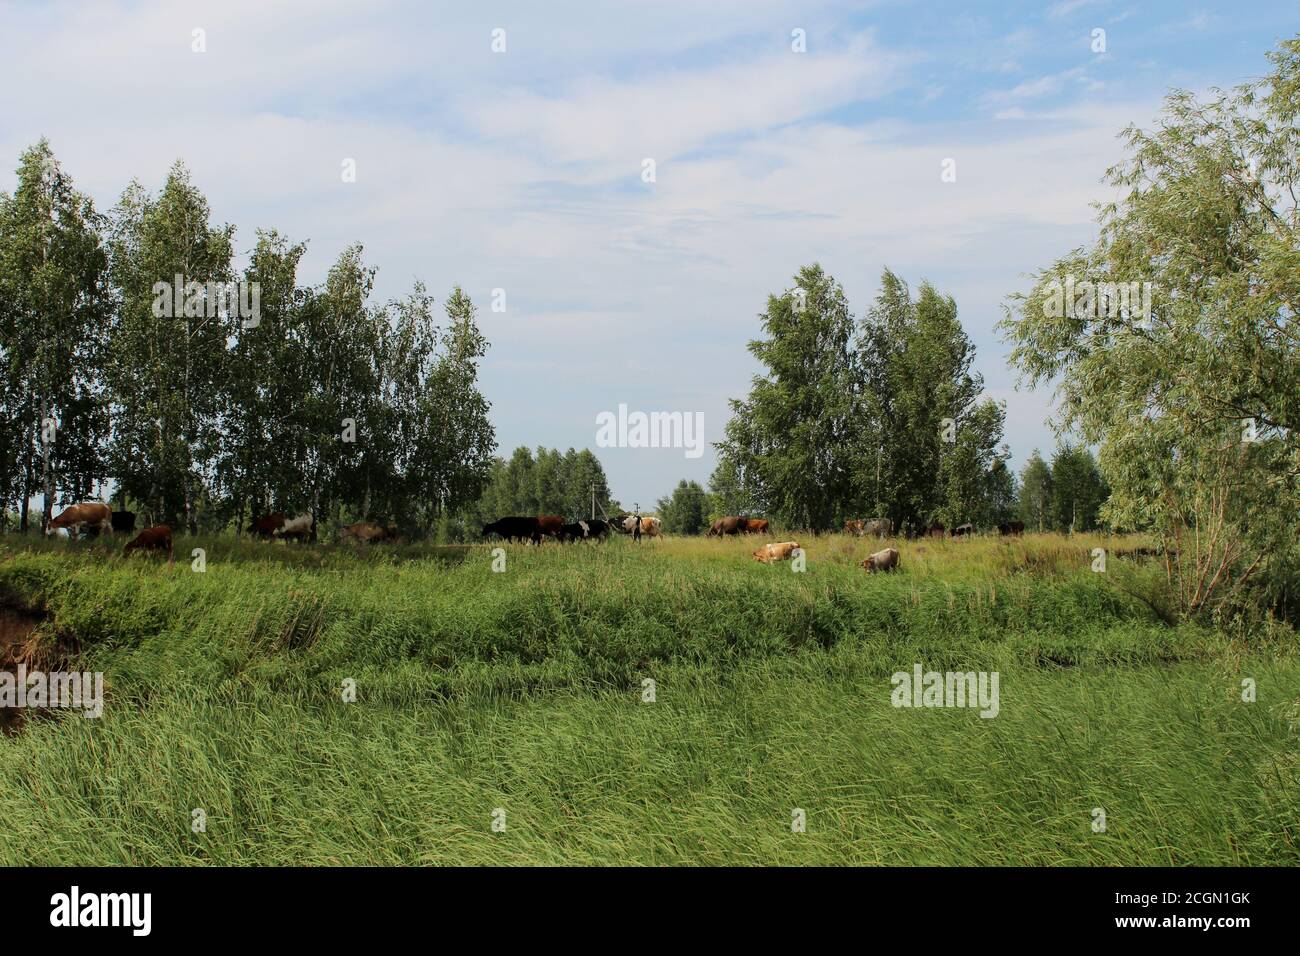 A herd of cows graze in a meadow near the river on a Sunny day. Stock Photo